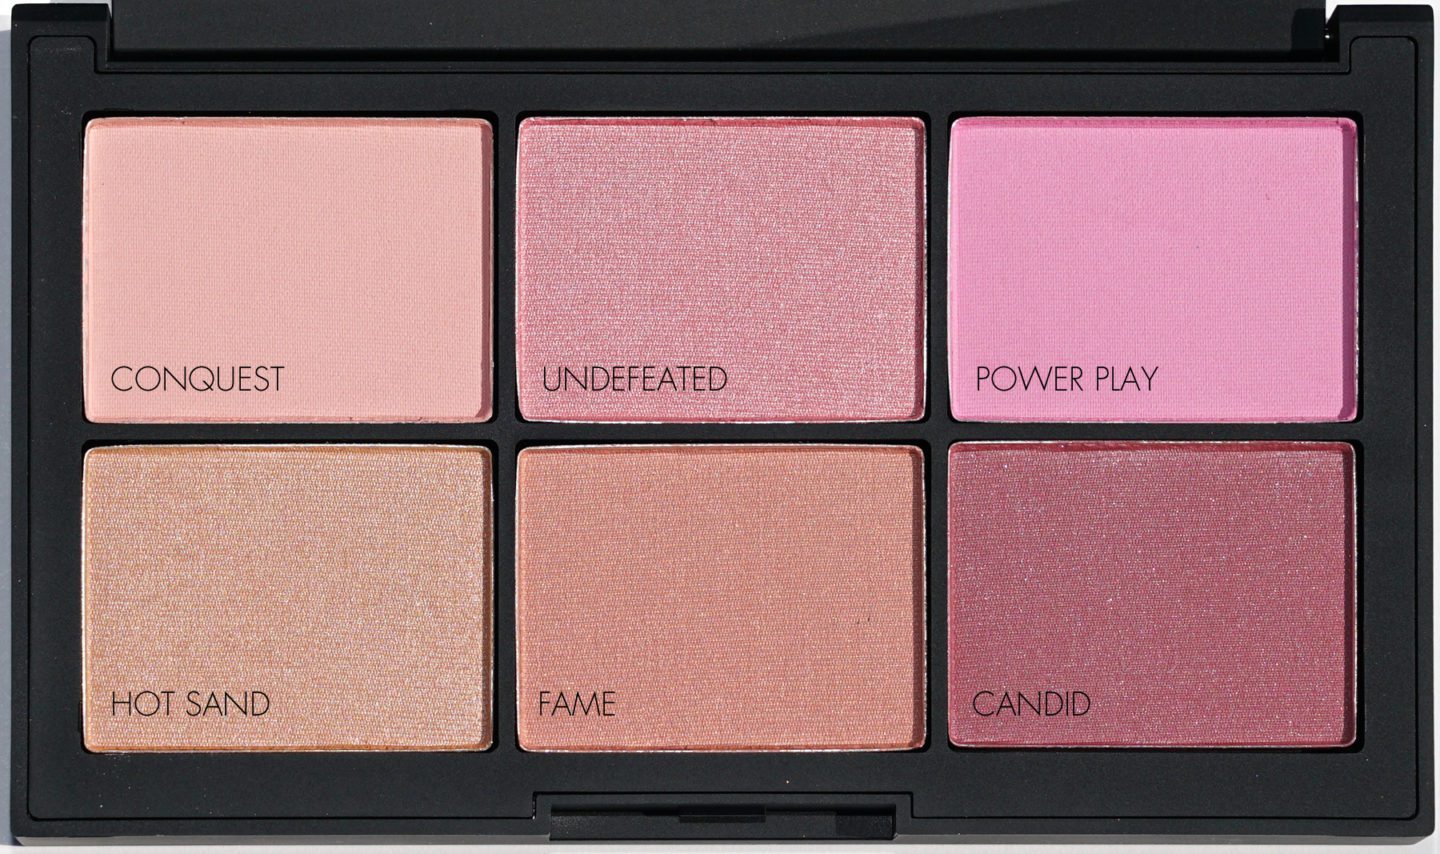 NARSissist Unfiltered Cheek Palette II review and swatches